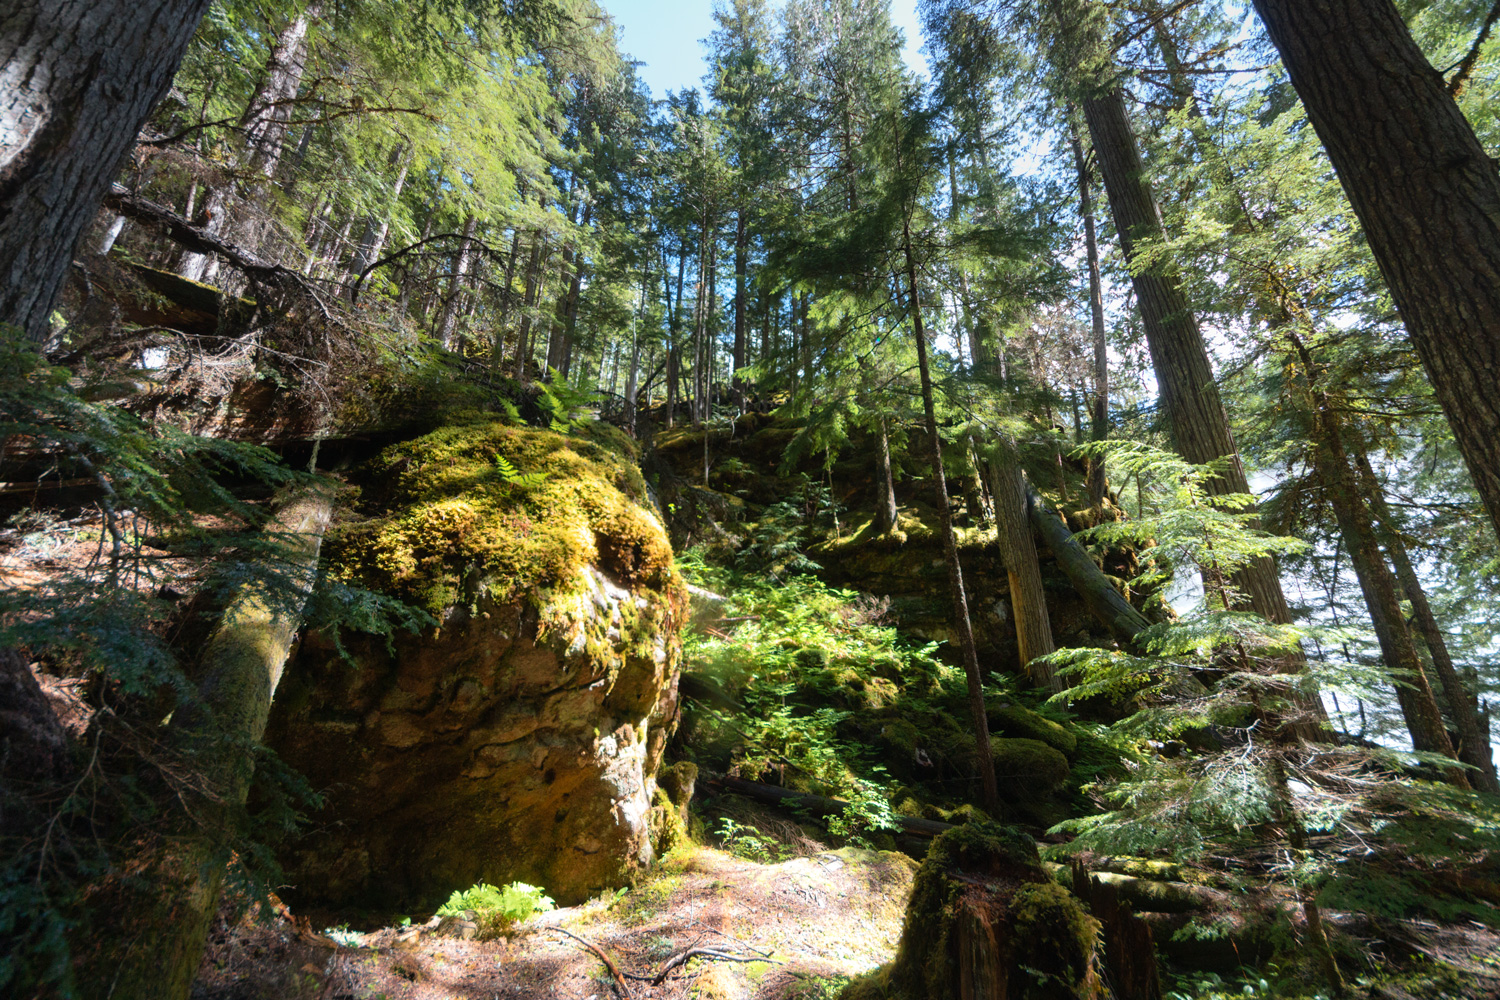 A large boulder surrounded by a very green forest